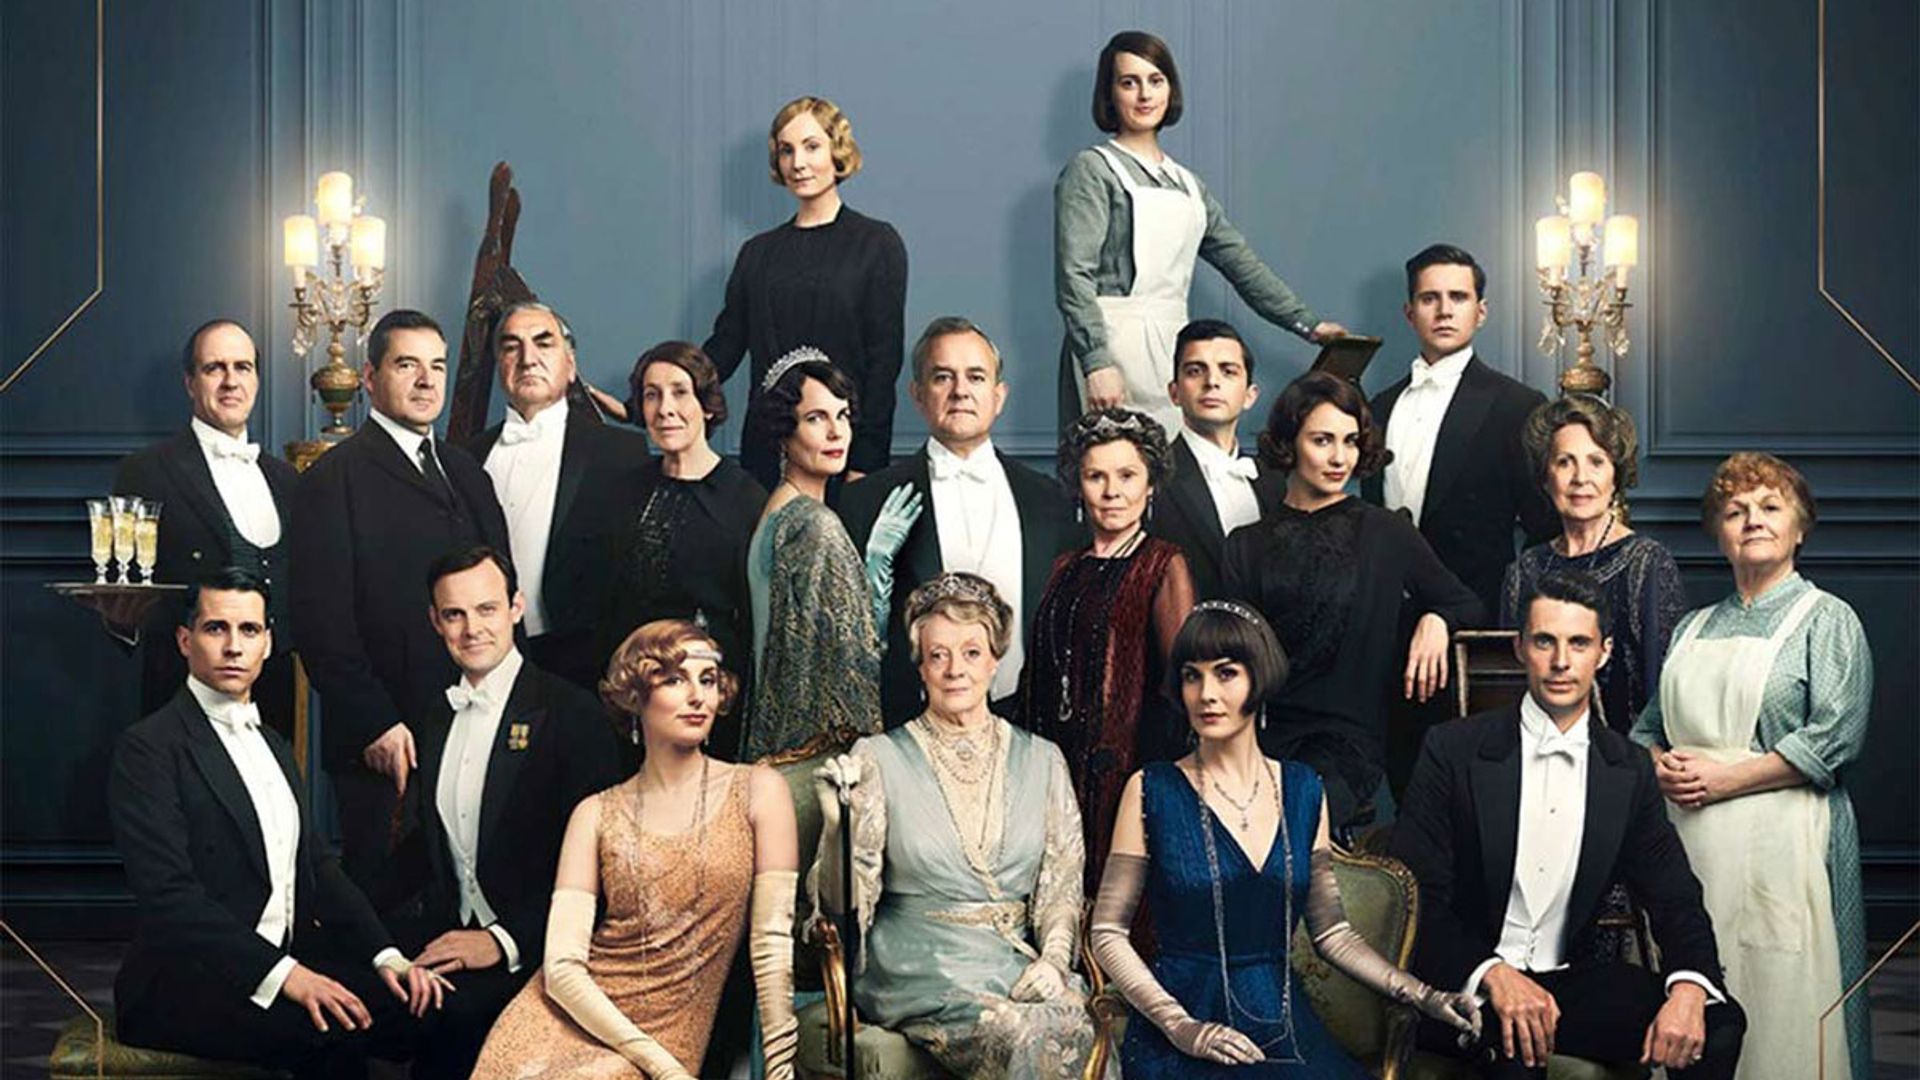 5 things you didn't know about Downton Abbey